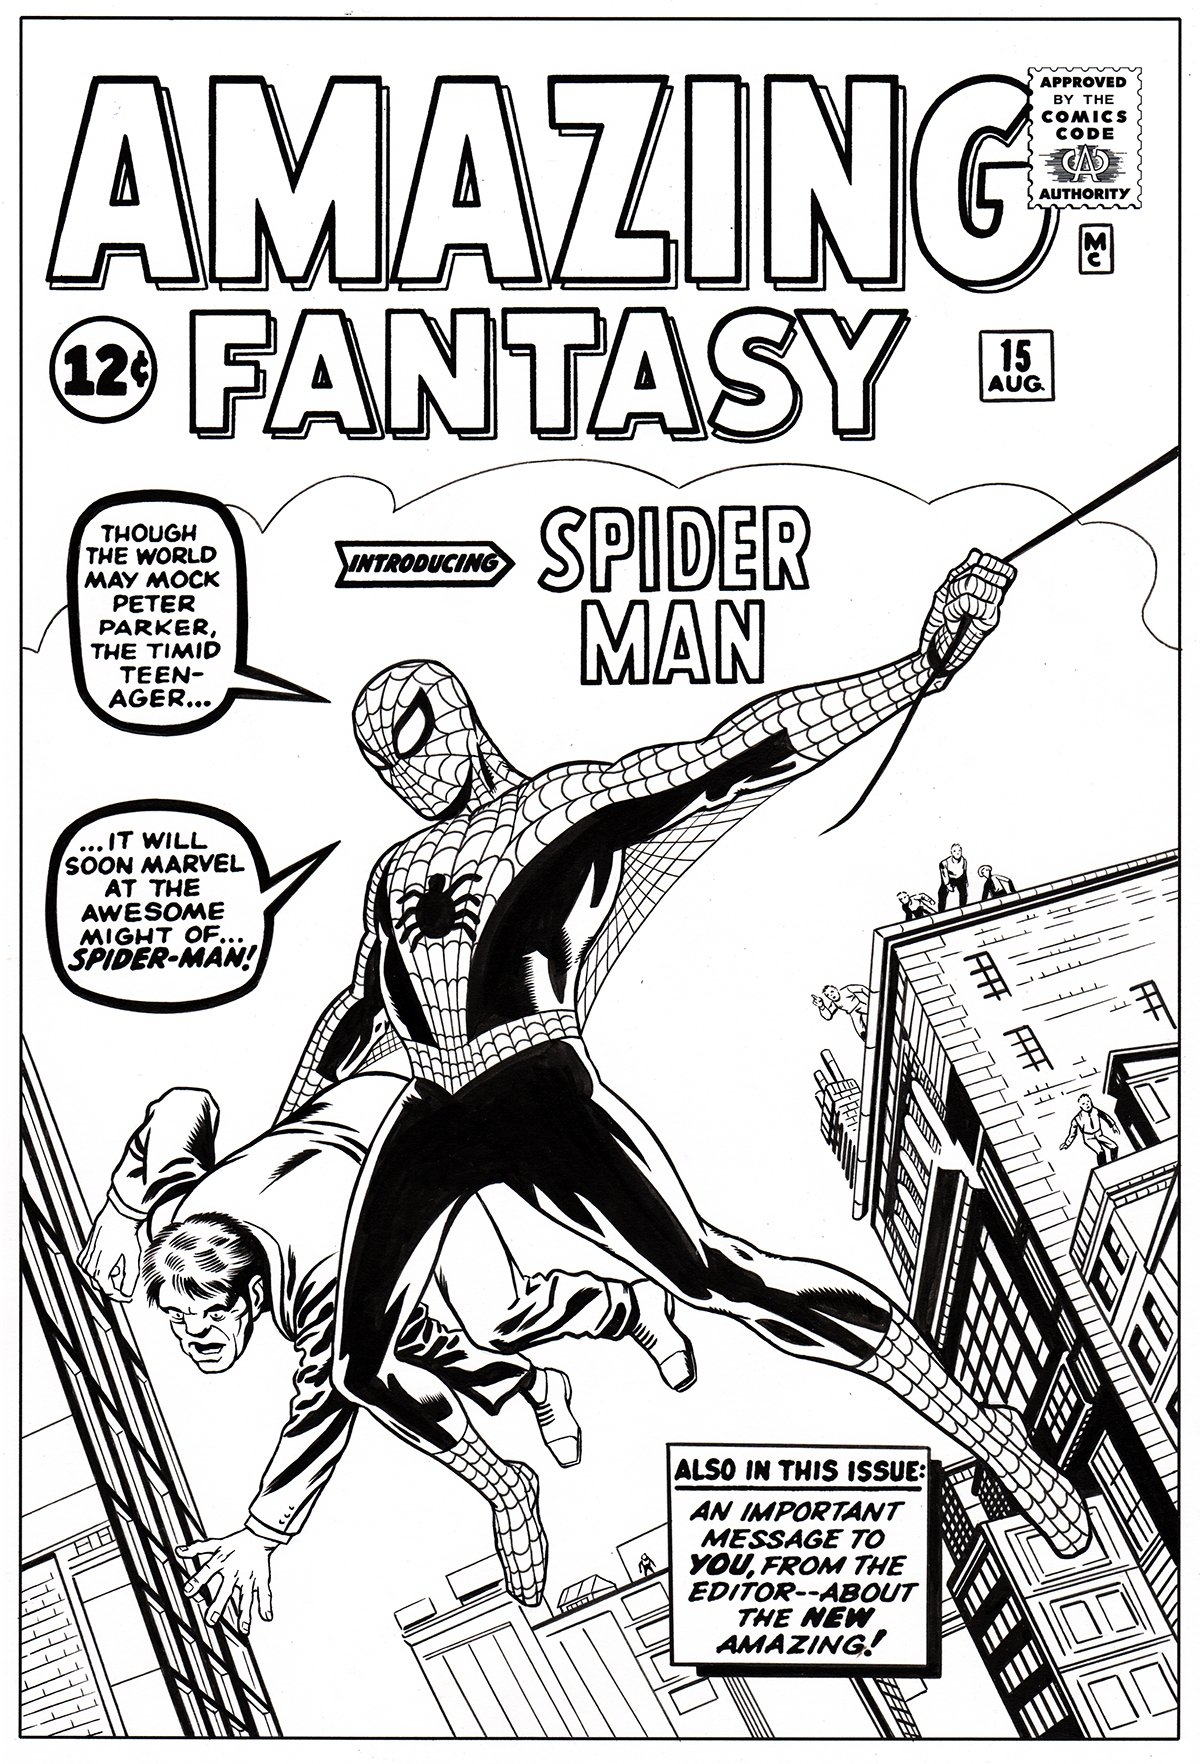 The Mystery behind the Cover of Amazing Fantasy #15 – Carl's Comix